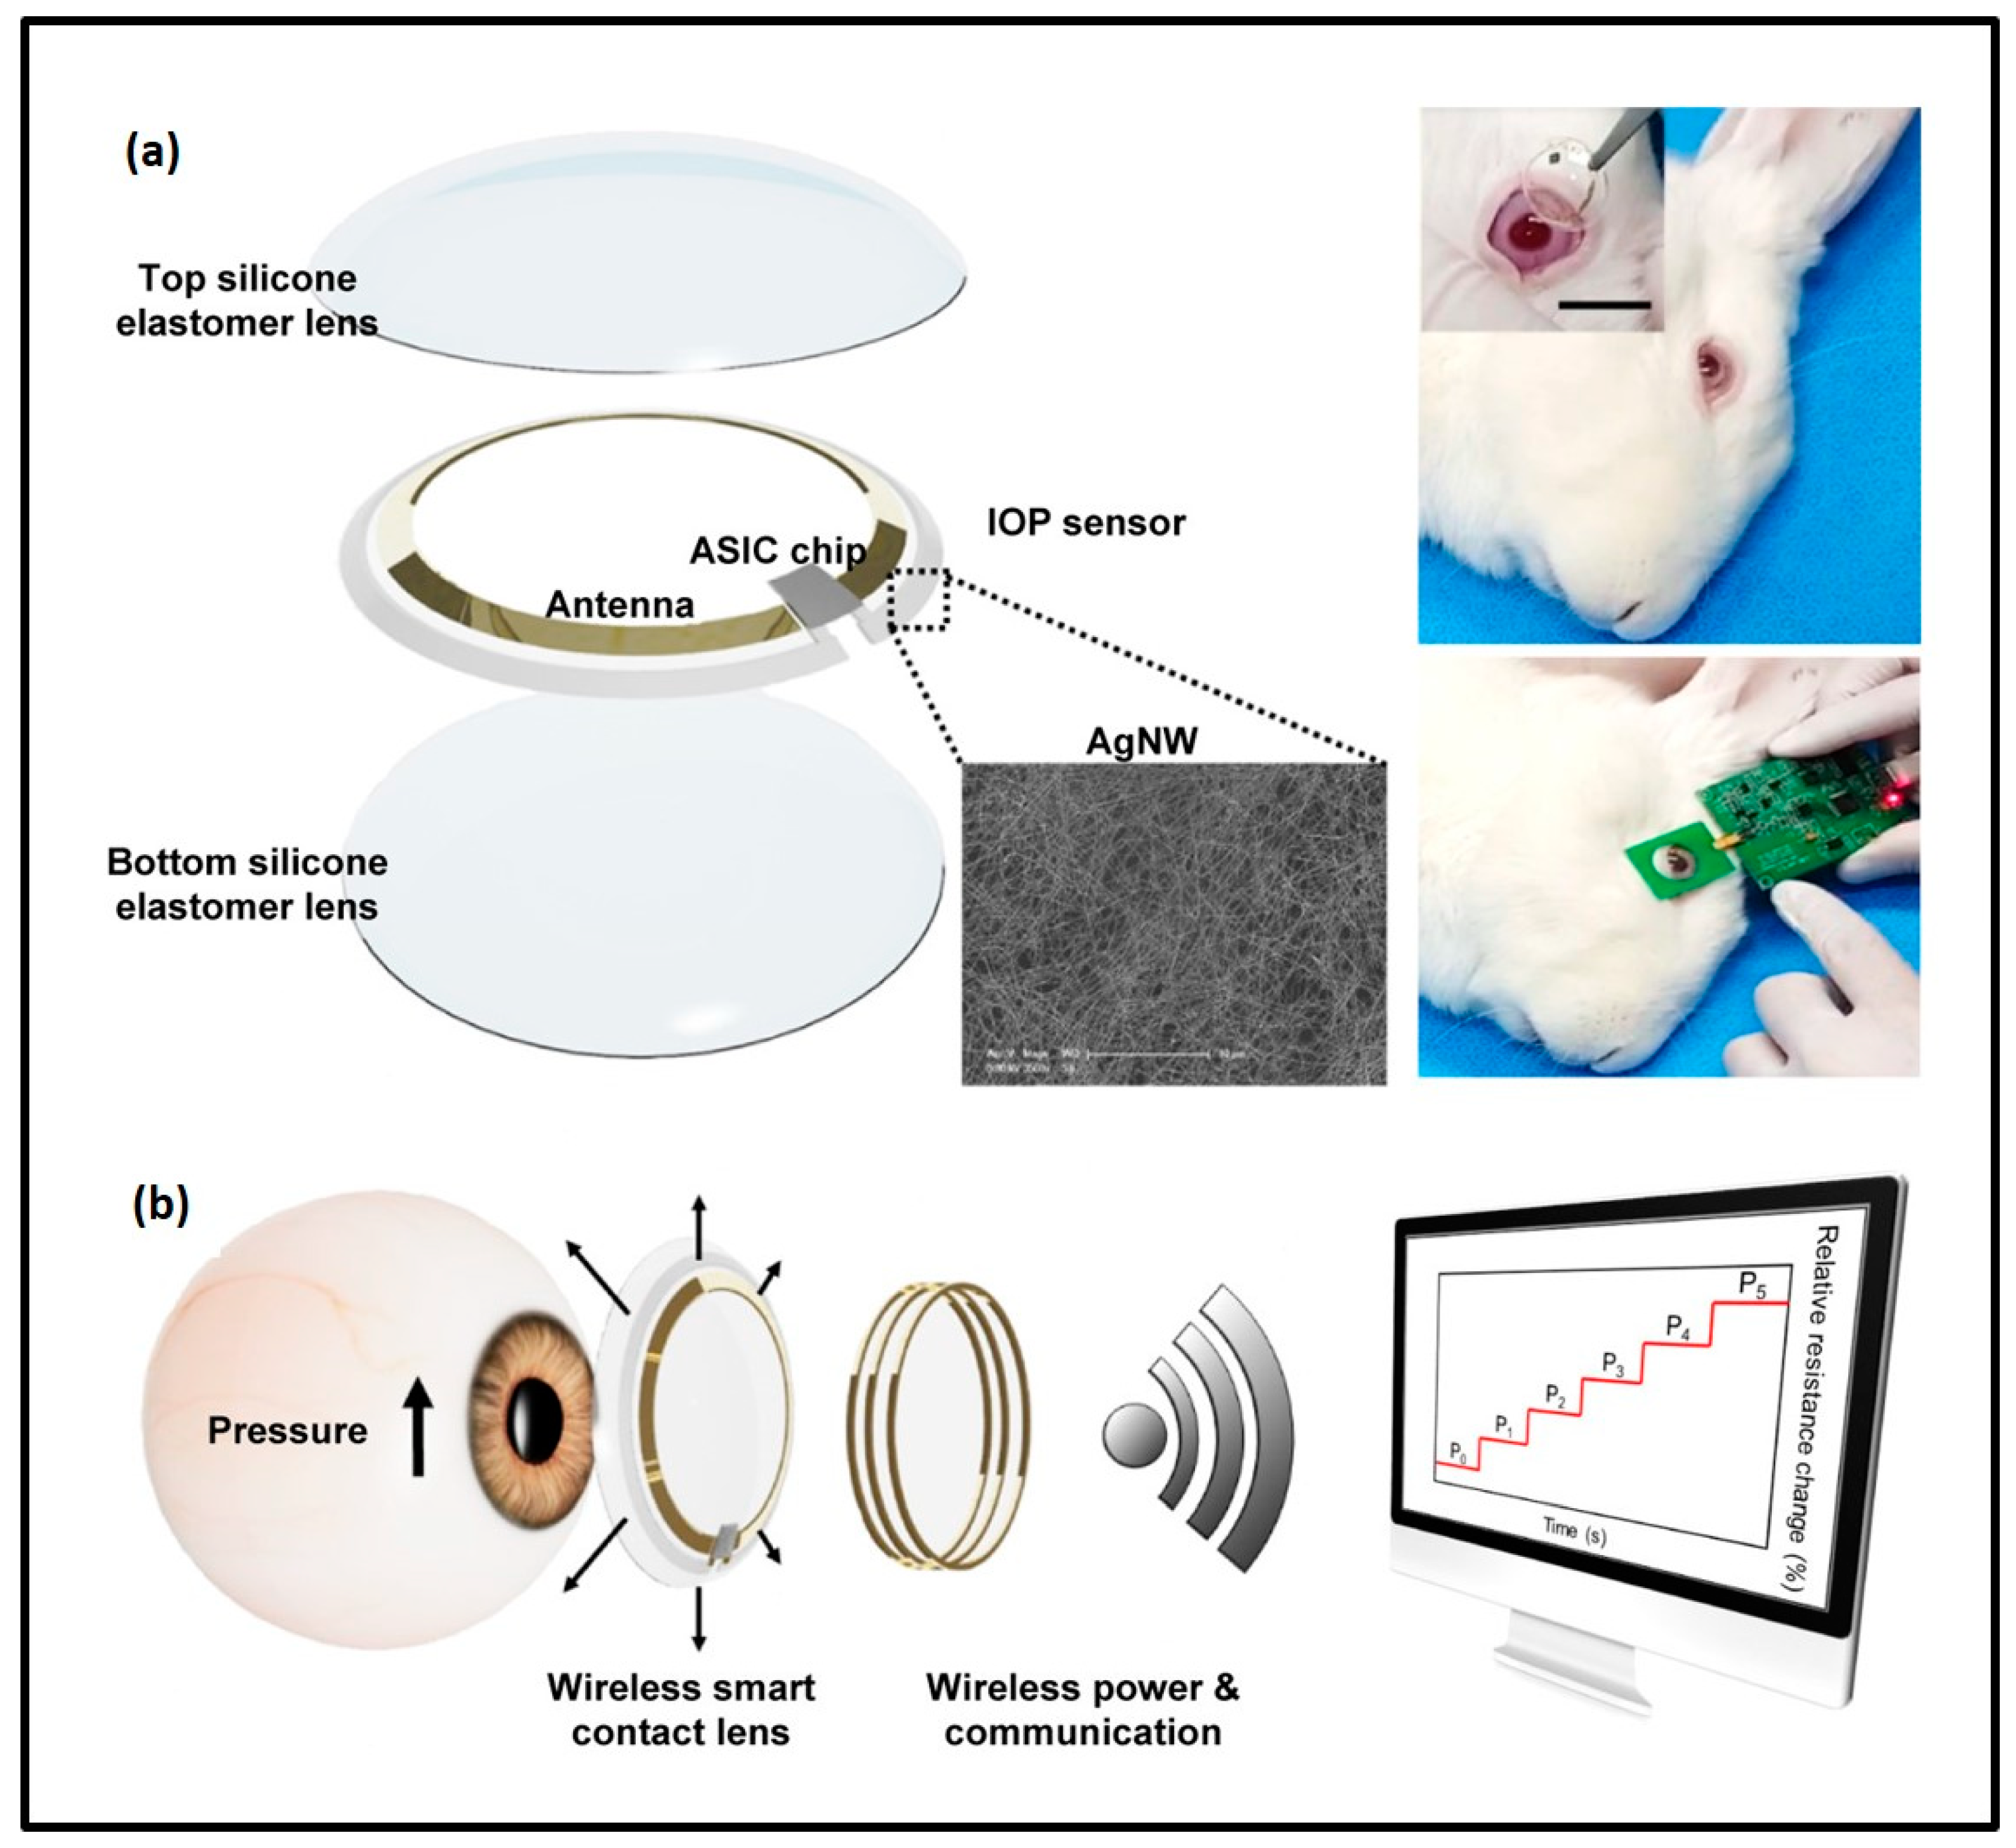 Eye-pressure-sensing contact lens both monitors and manages glaucoma